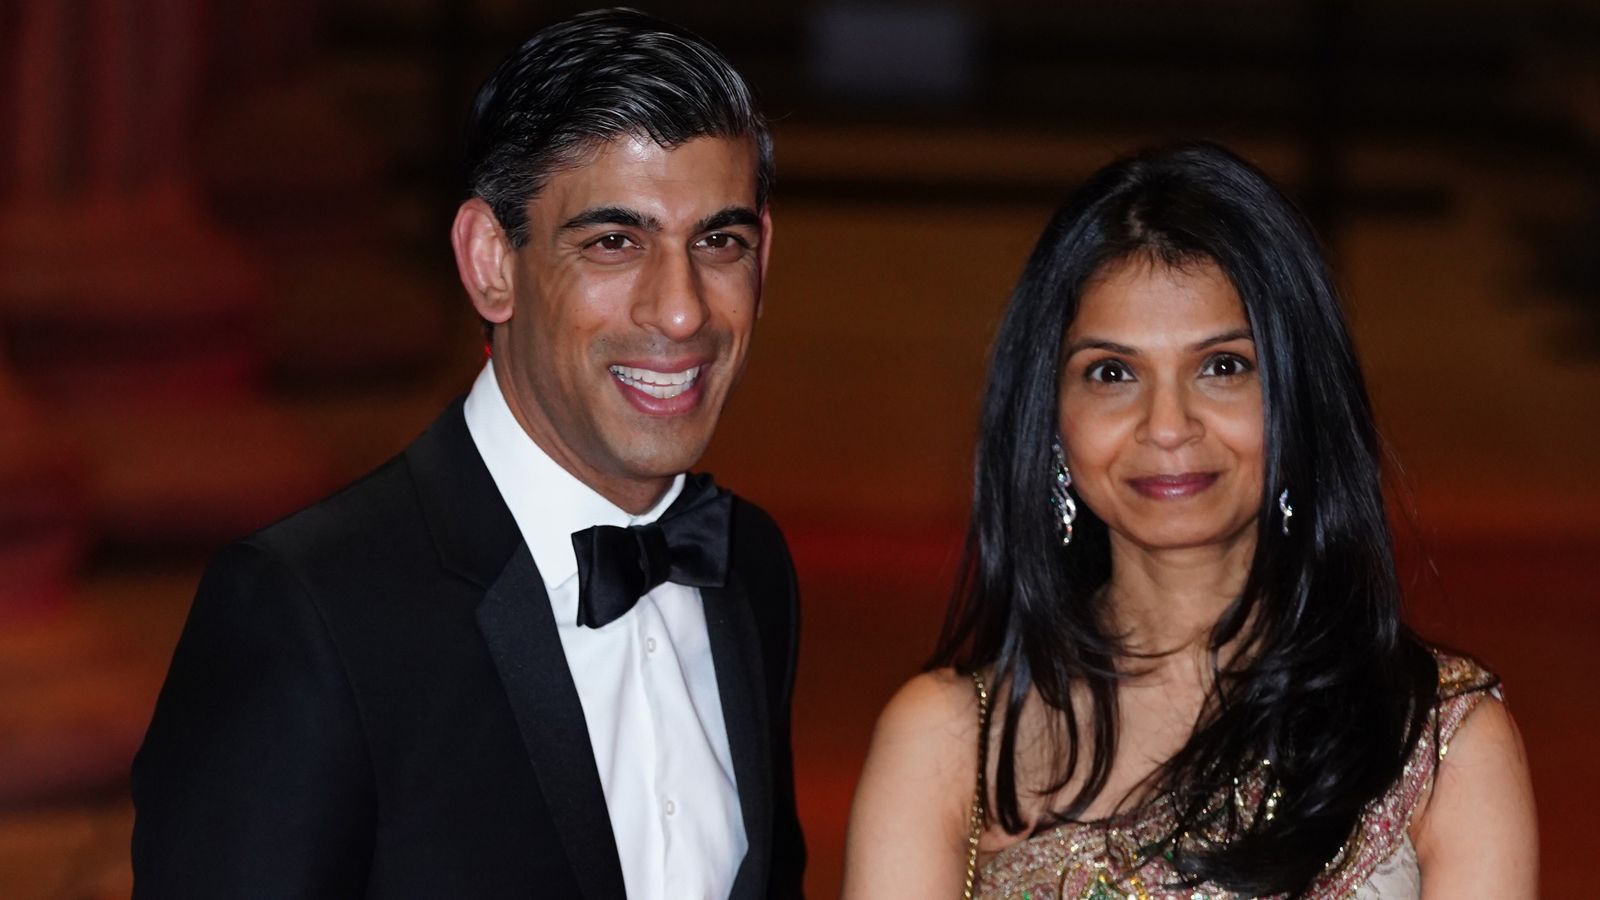 Rishi Sunak challenged over wife's links to company Infosys that has  presence in Russia | Politics News | Sky News